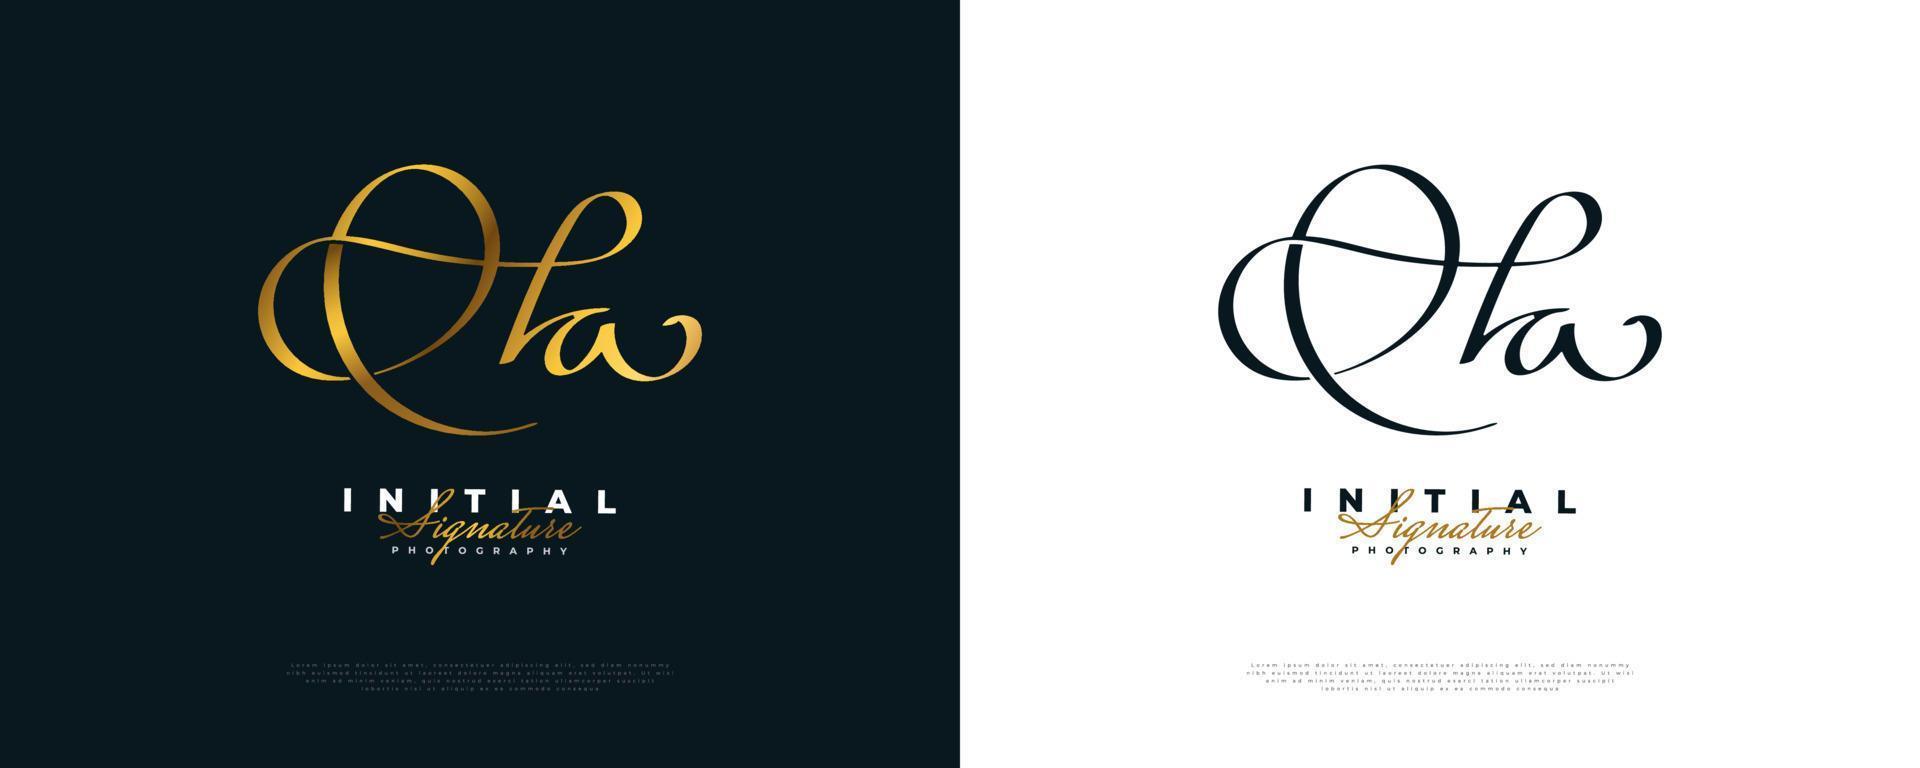 HA Initial Signature Logo Design with Gold Handwriting Style. Initial H and A Logo Design for Wedding, Fashion, Jewelry, Boutique and Business Brand Identity vector